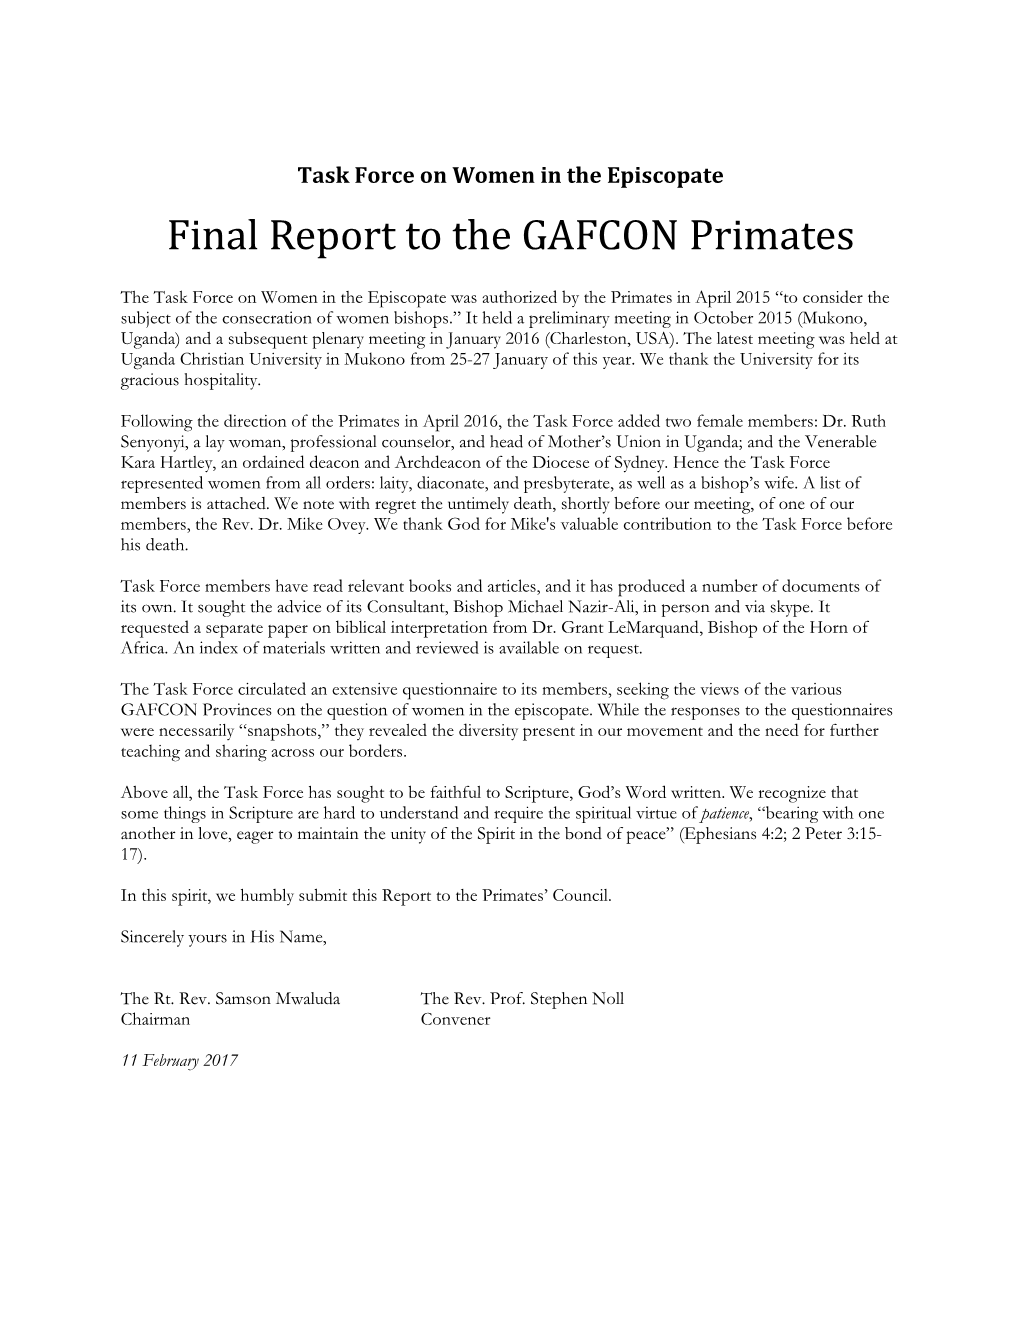 Final Report to the GAFCON Primates